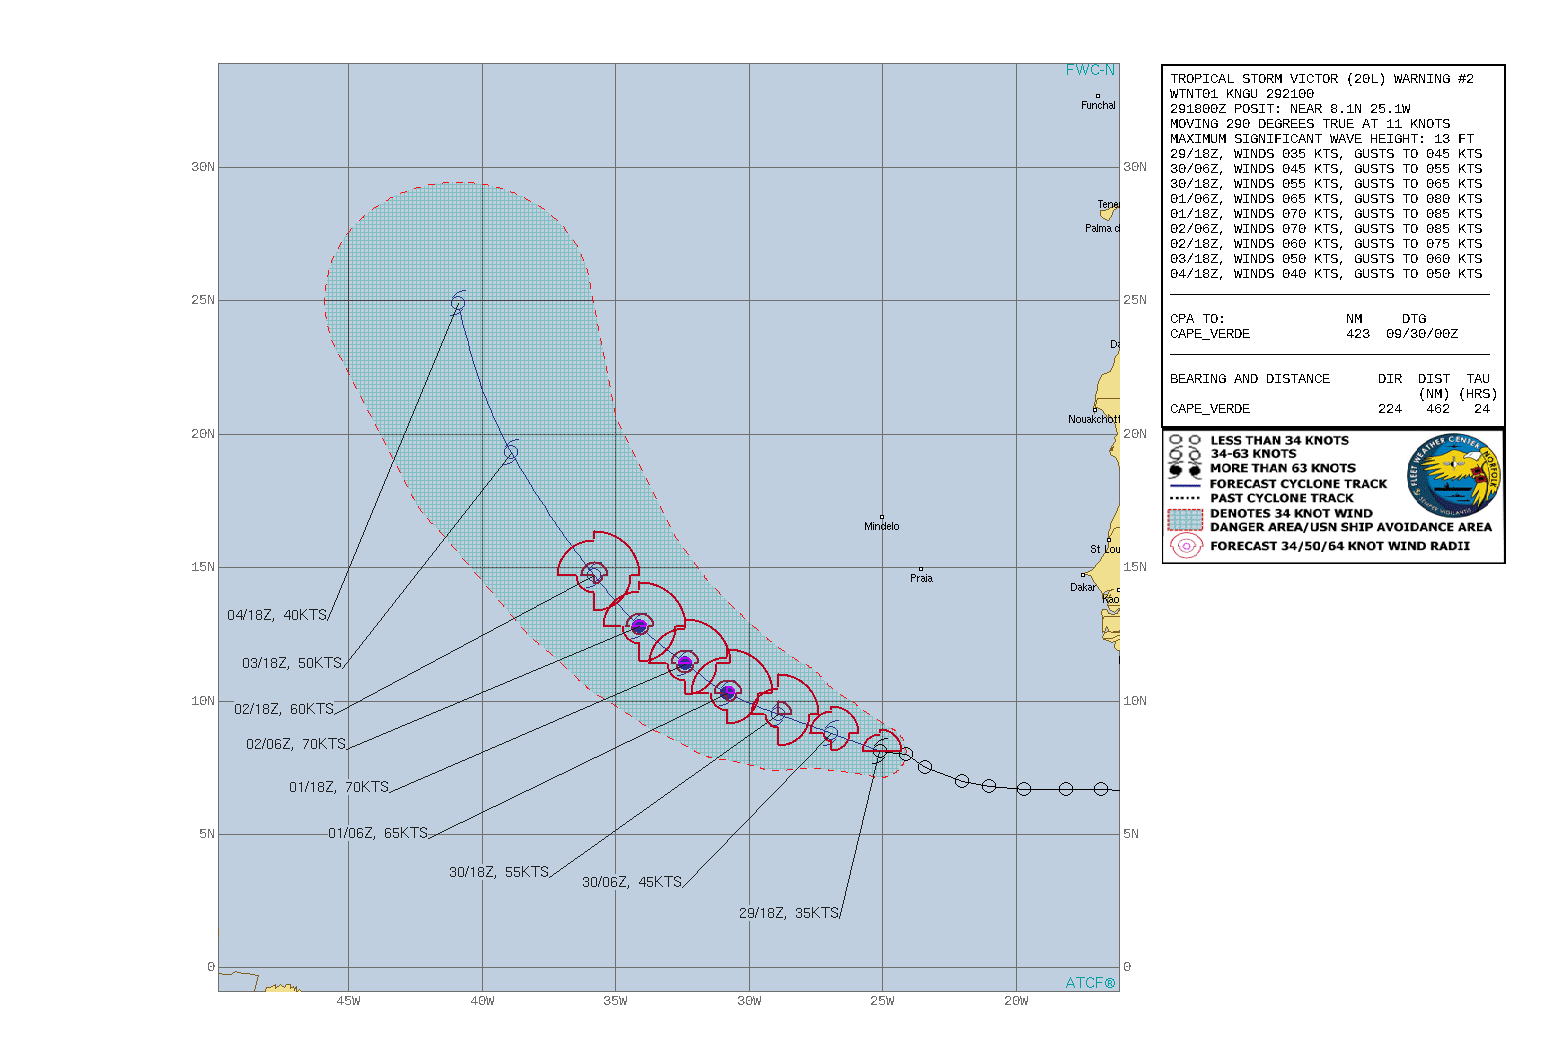 CURRENT INTENSITY IS 35KNOTS AND IS FORECAST TO PEAK AT 70KNOTS/CAT 1 BY 01/18UTC